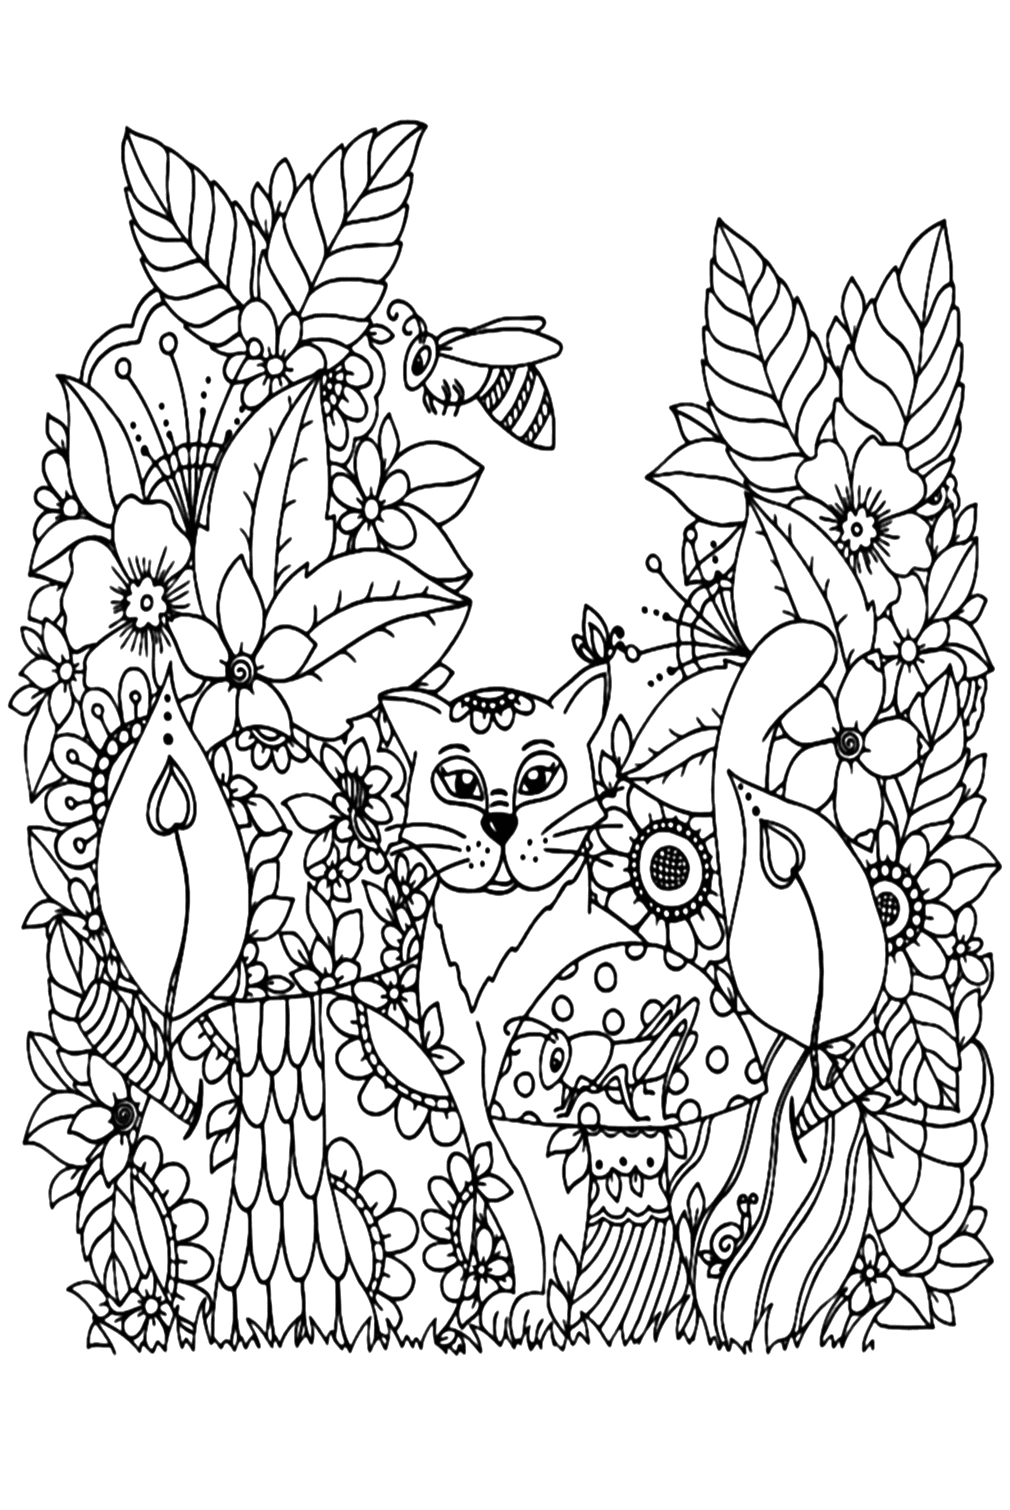 Cat And Wasp Coloring Page from Wasp